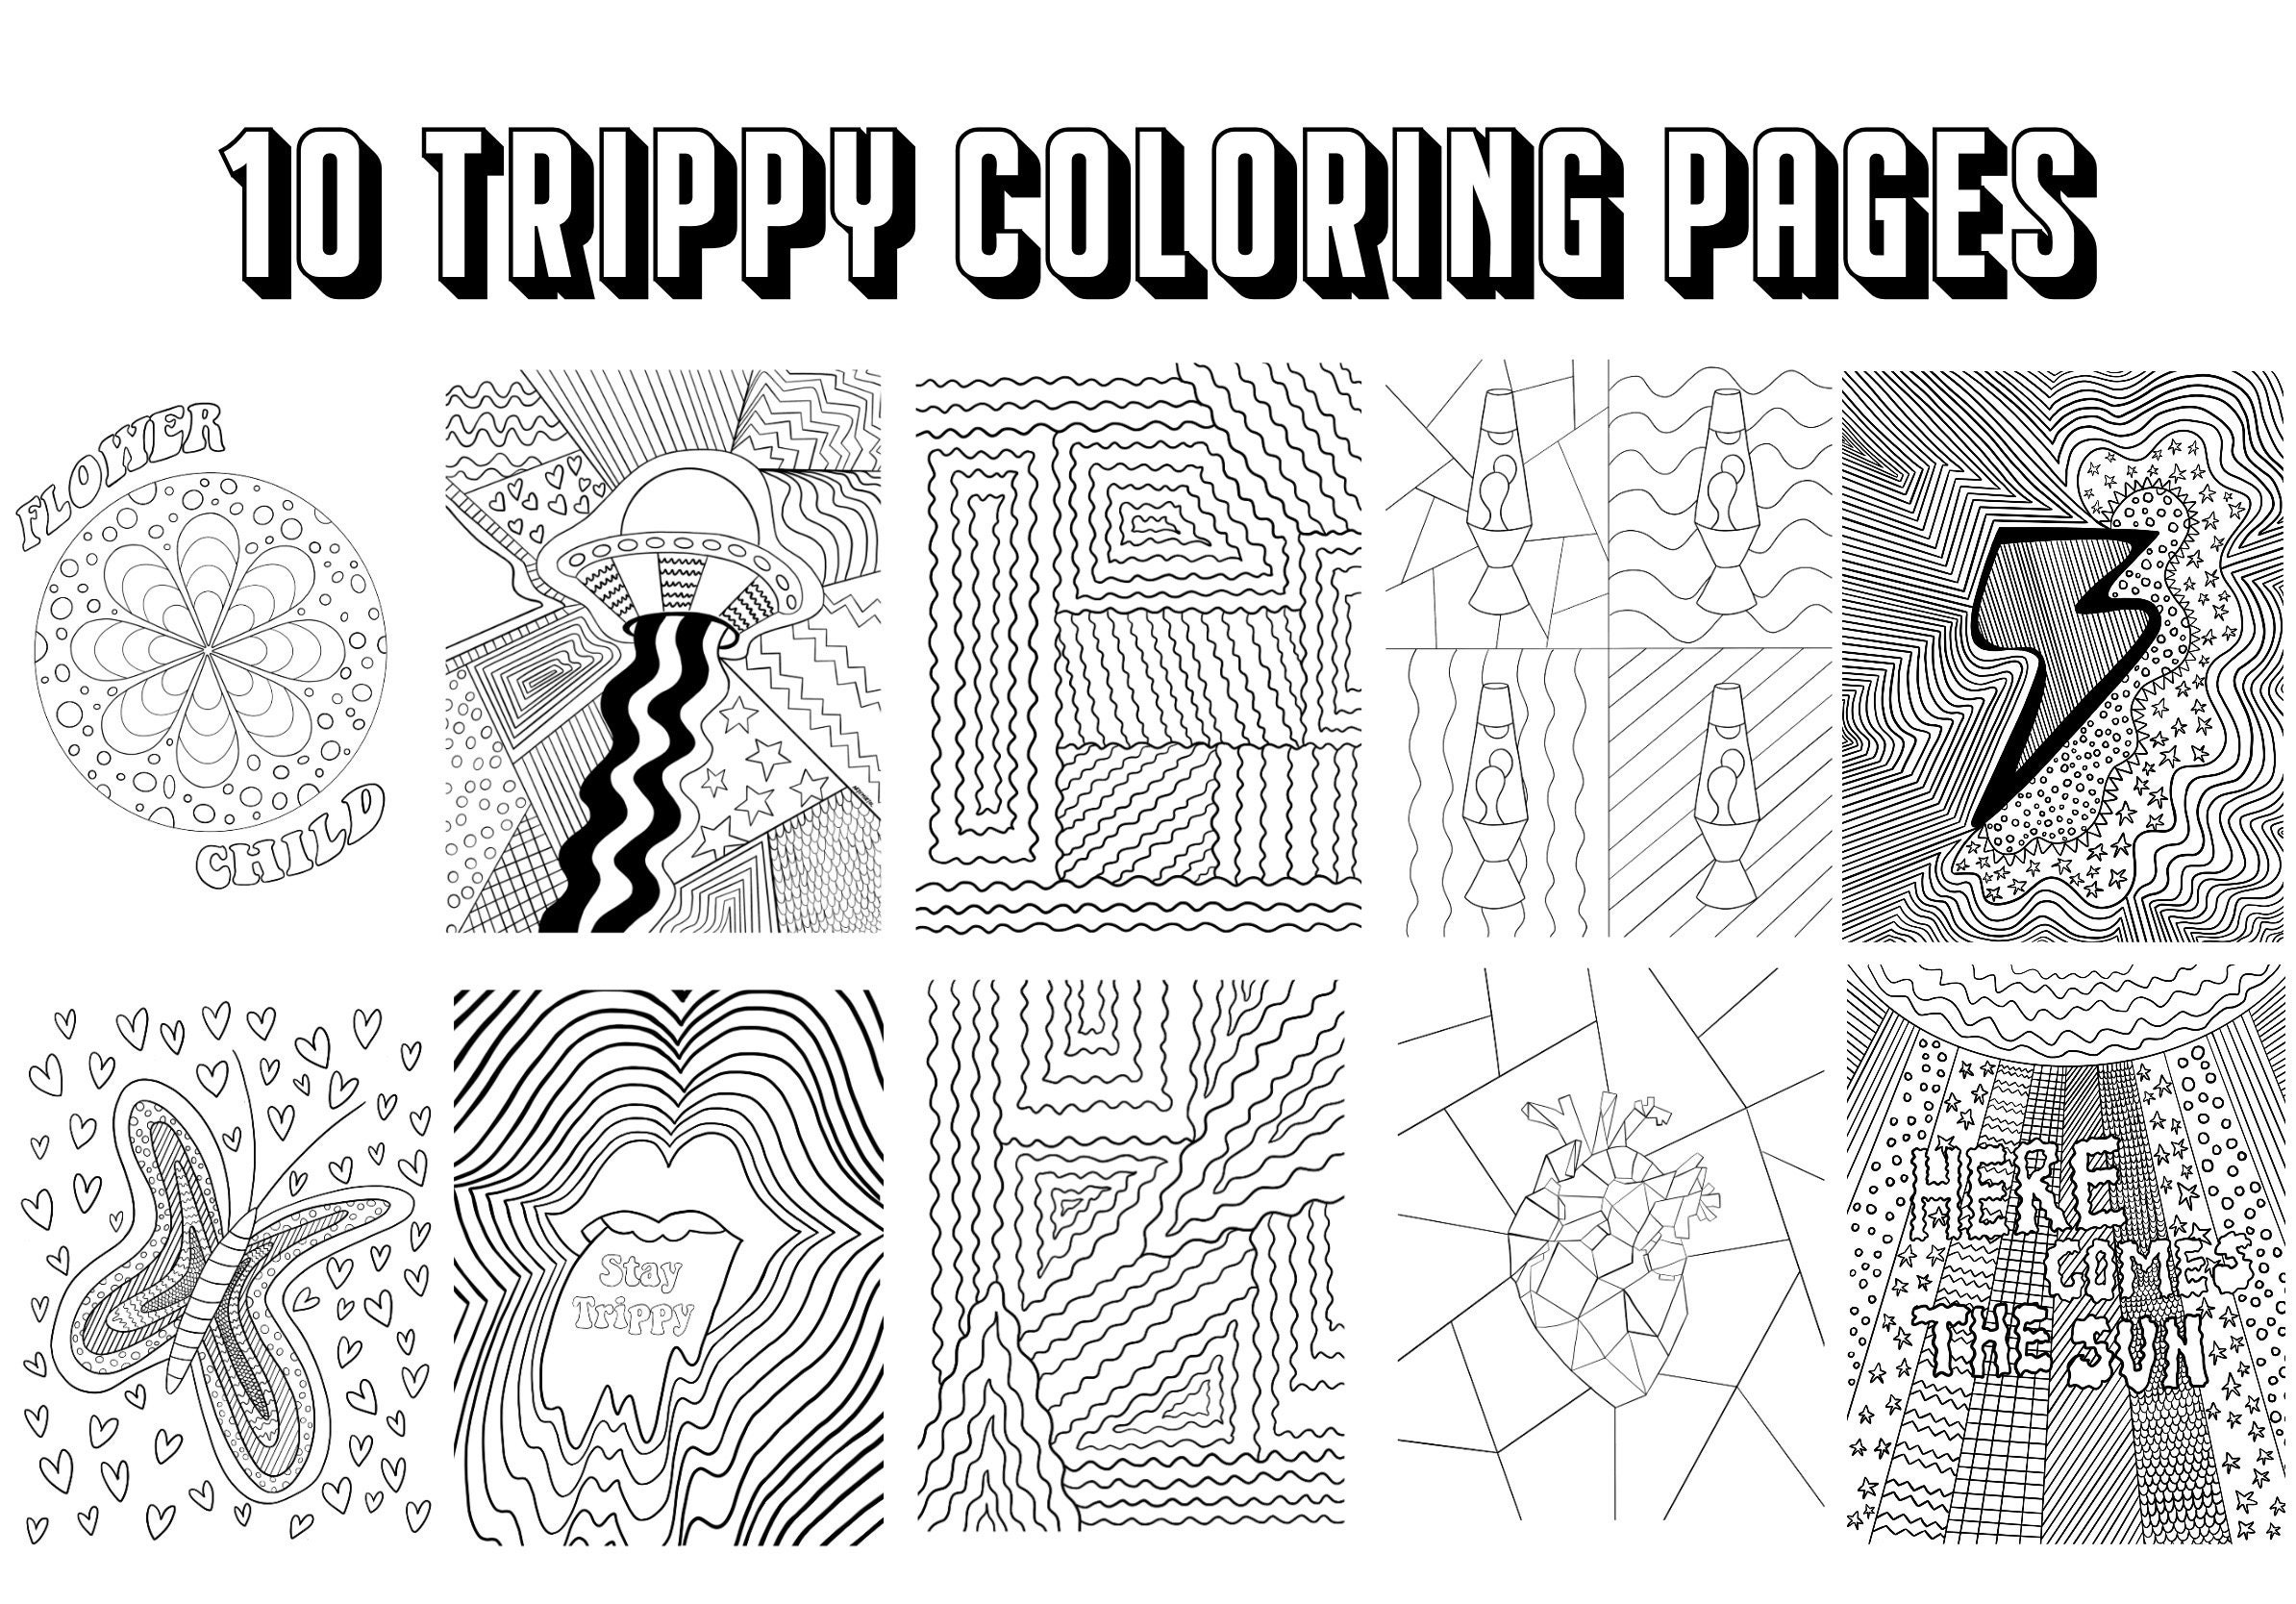 Trippy Coloring Pages / Trippy Art / Adult Coloring Pages | Etsy